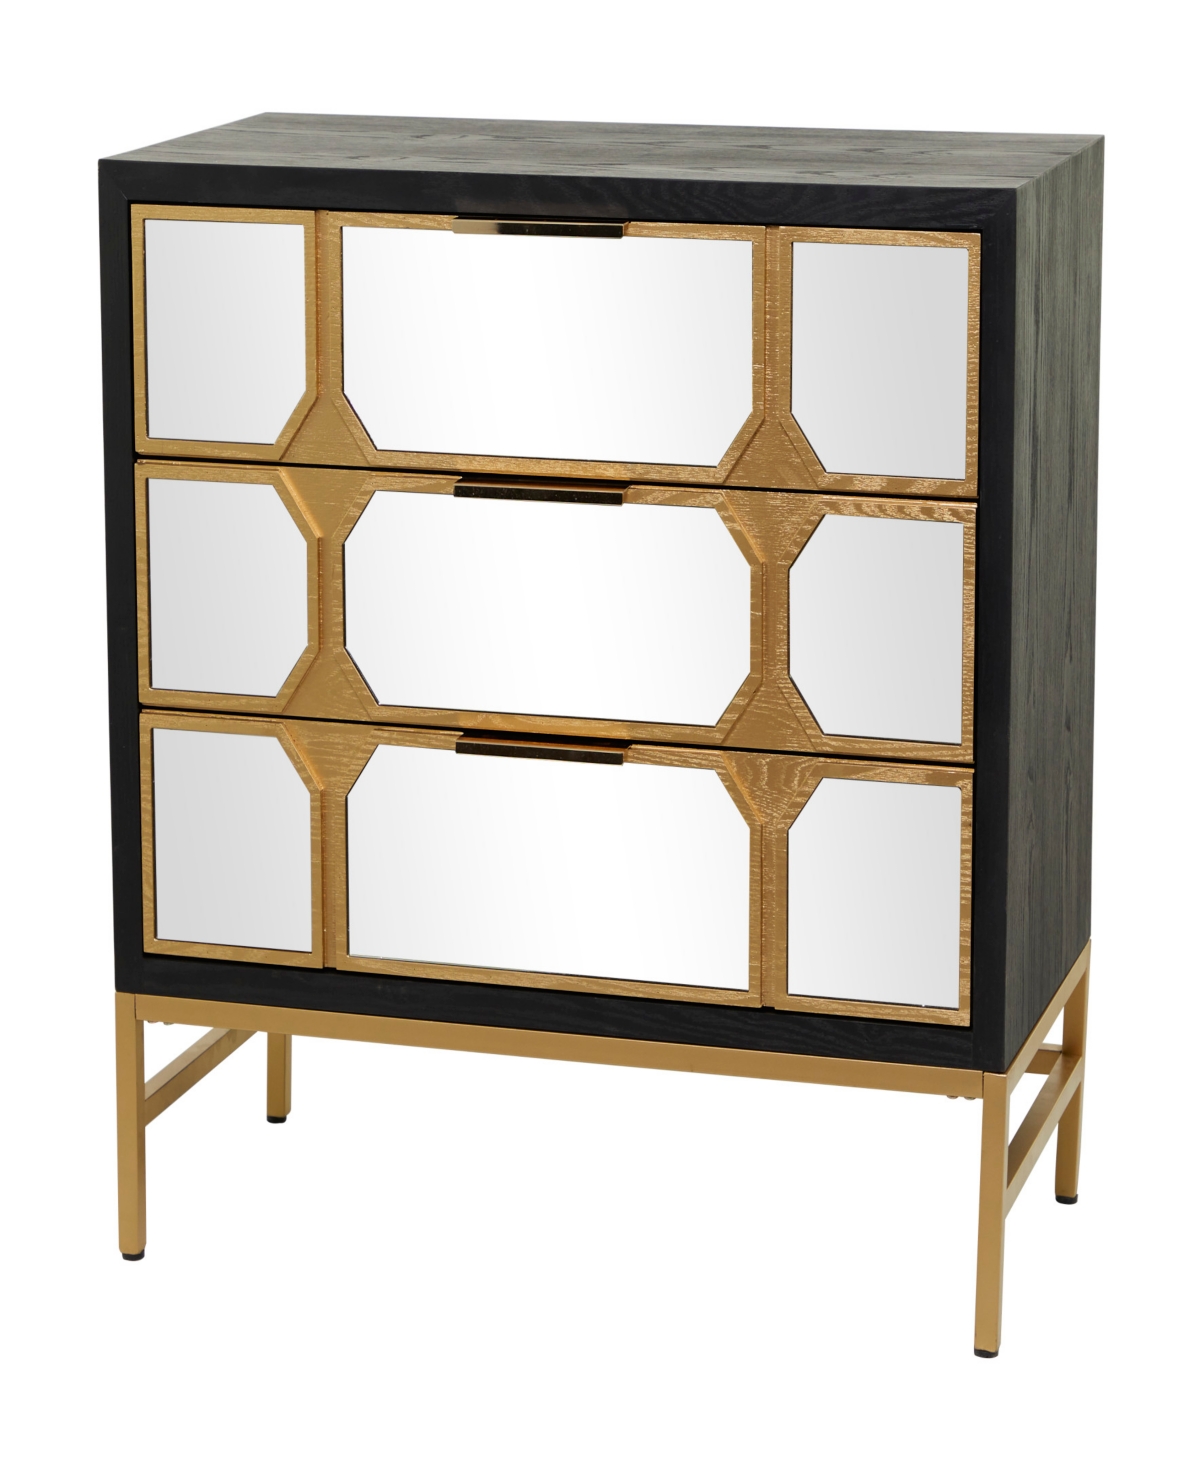 Rosemary Lane 32" Wood 3 Drawer Cabinet With Mirrored Front In Gold